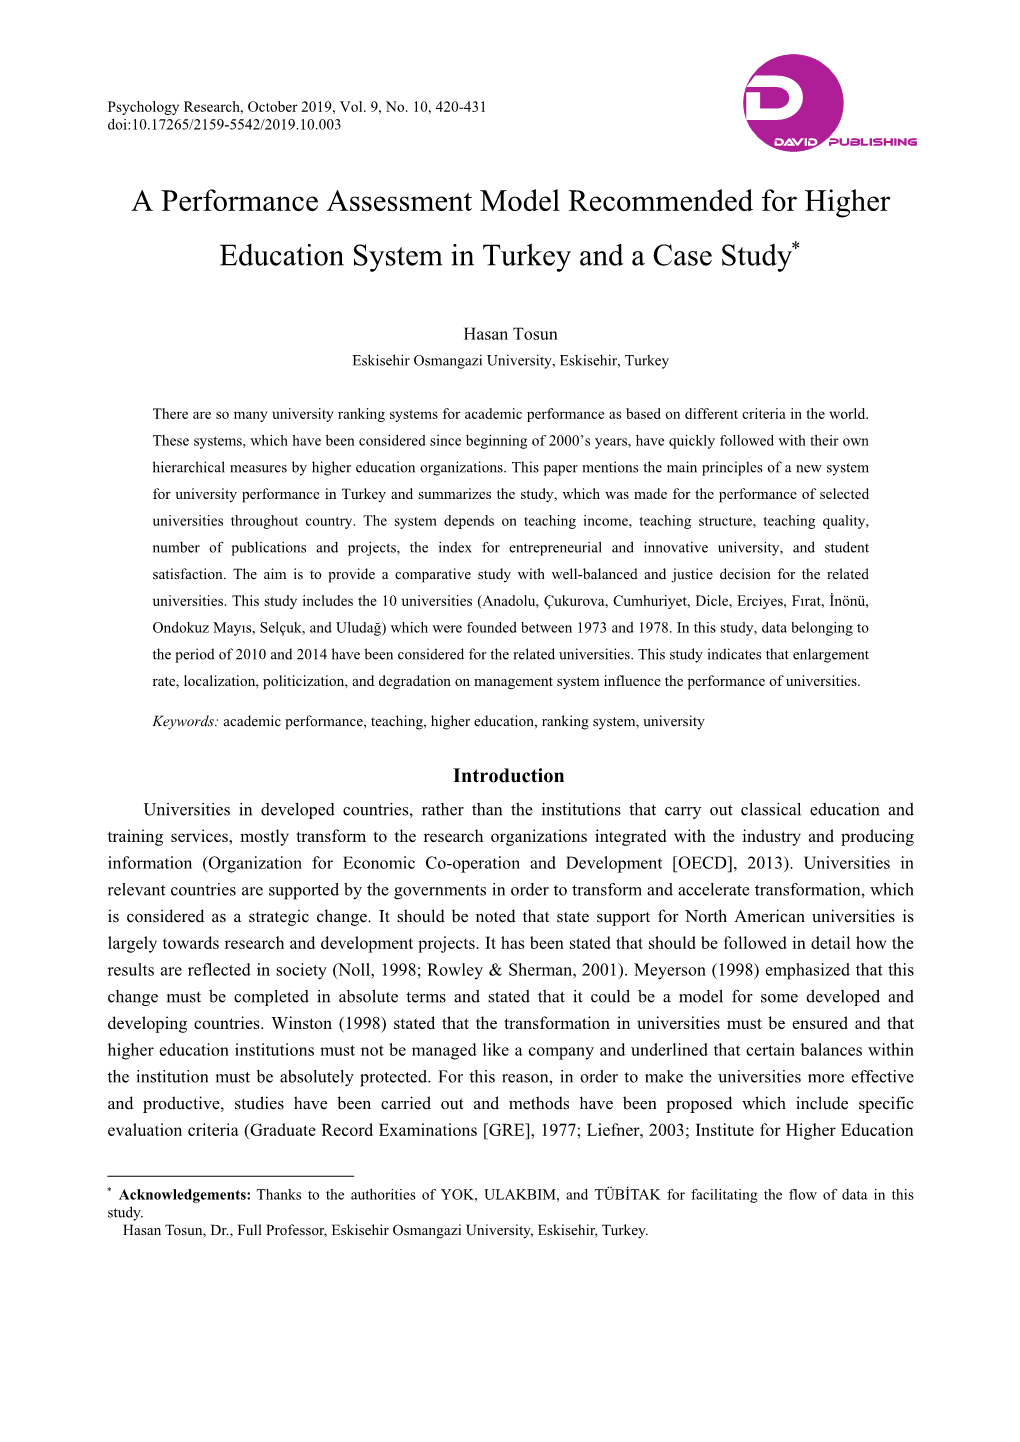 A Performance Assessment Model Recommended for Higher Education System in Turkey and a Case Study